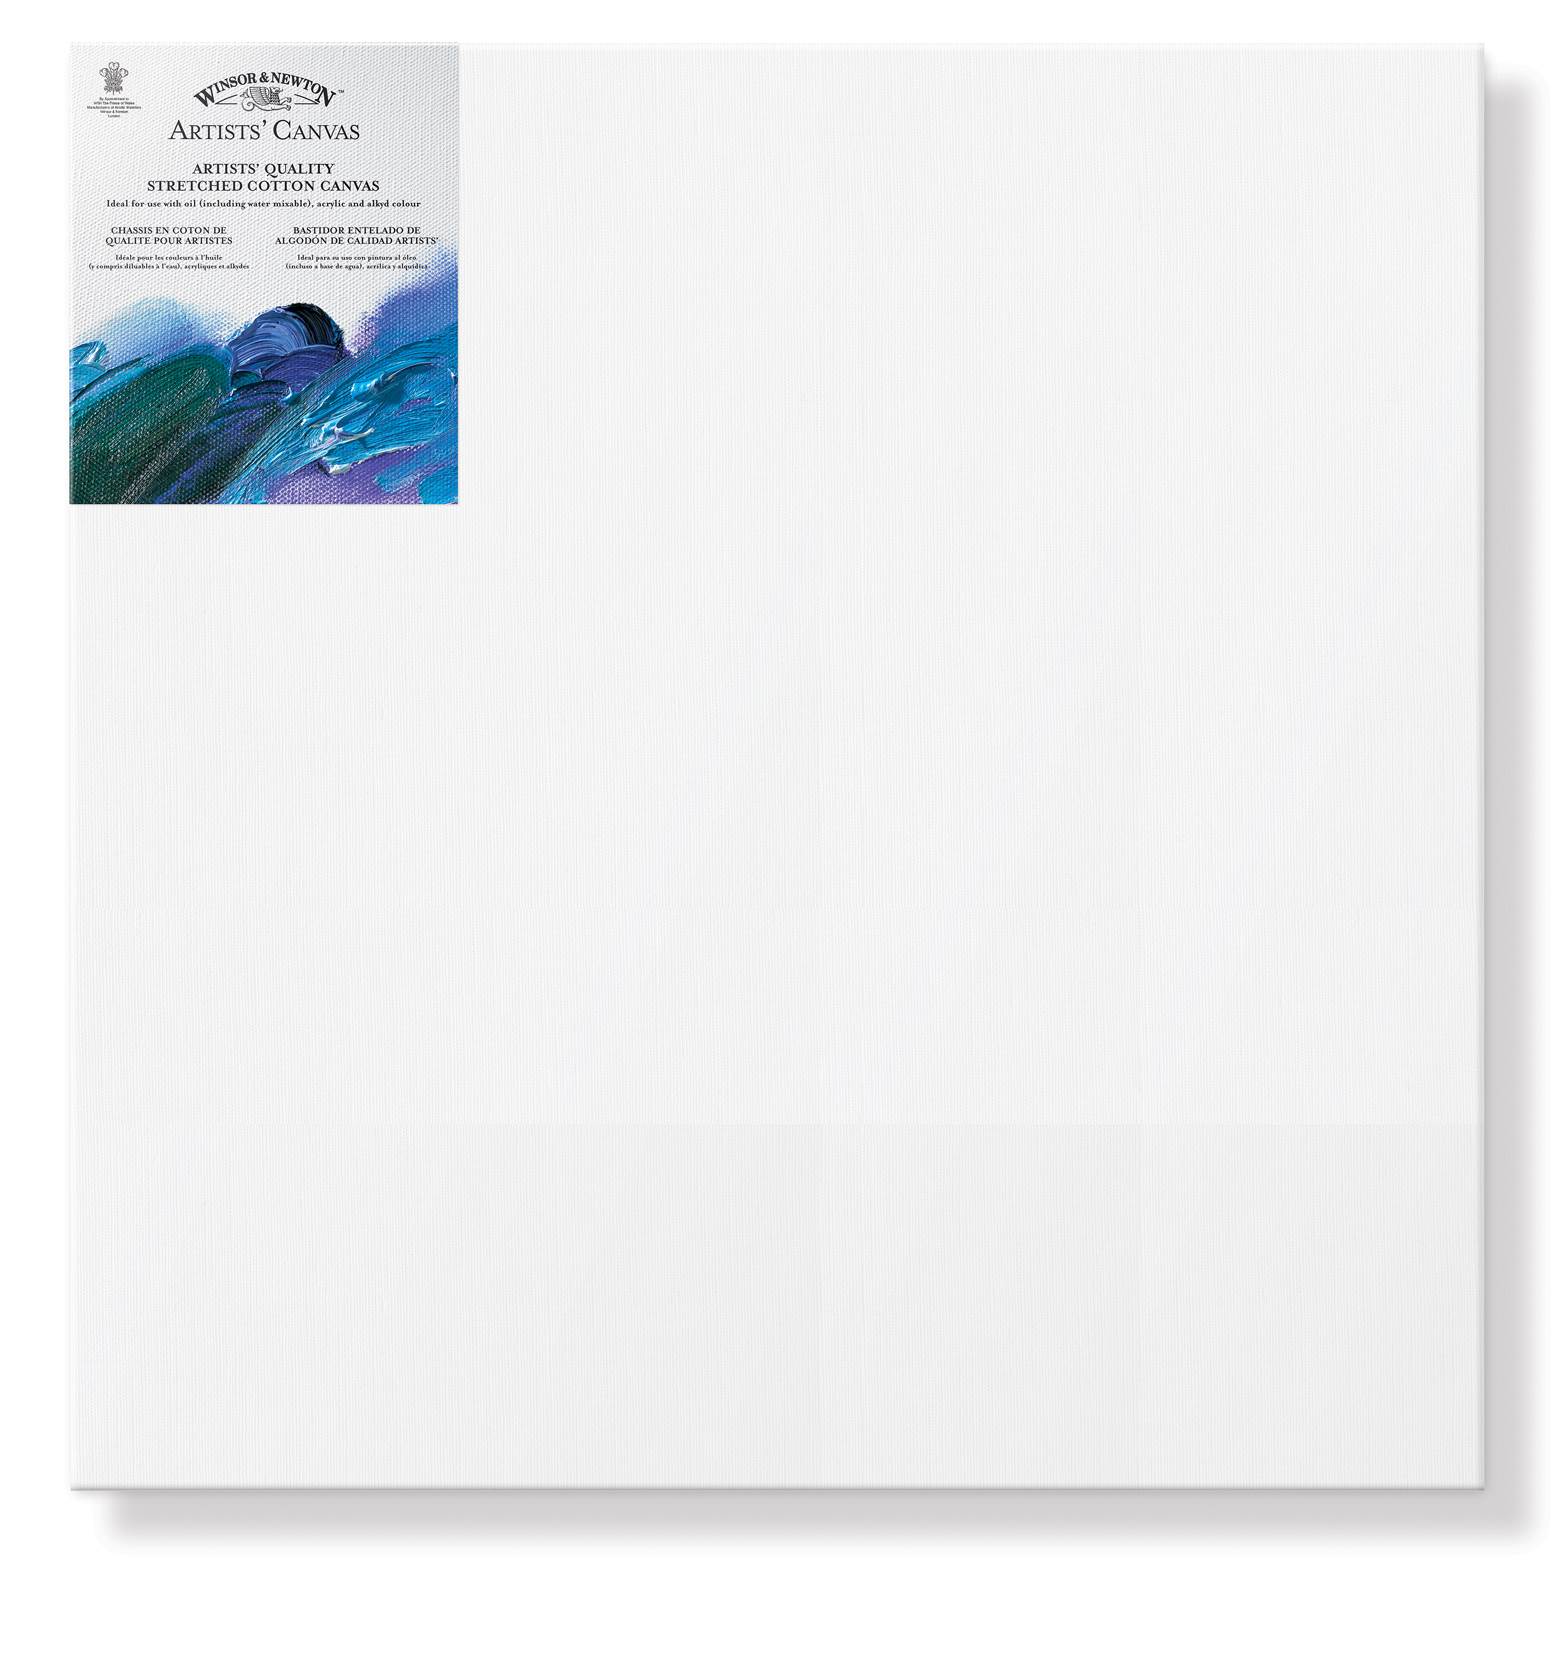 Winsor & Newton Artists' Quality Stretched Cotton Canvas - 14x14-inch (356x356mm)